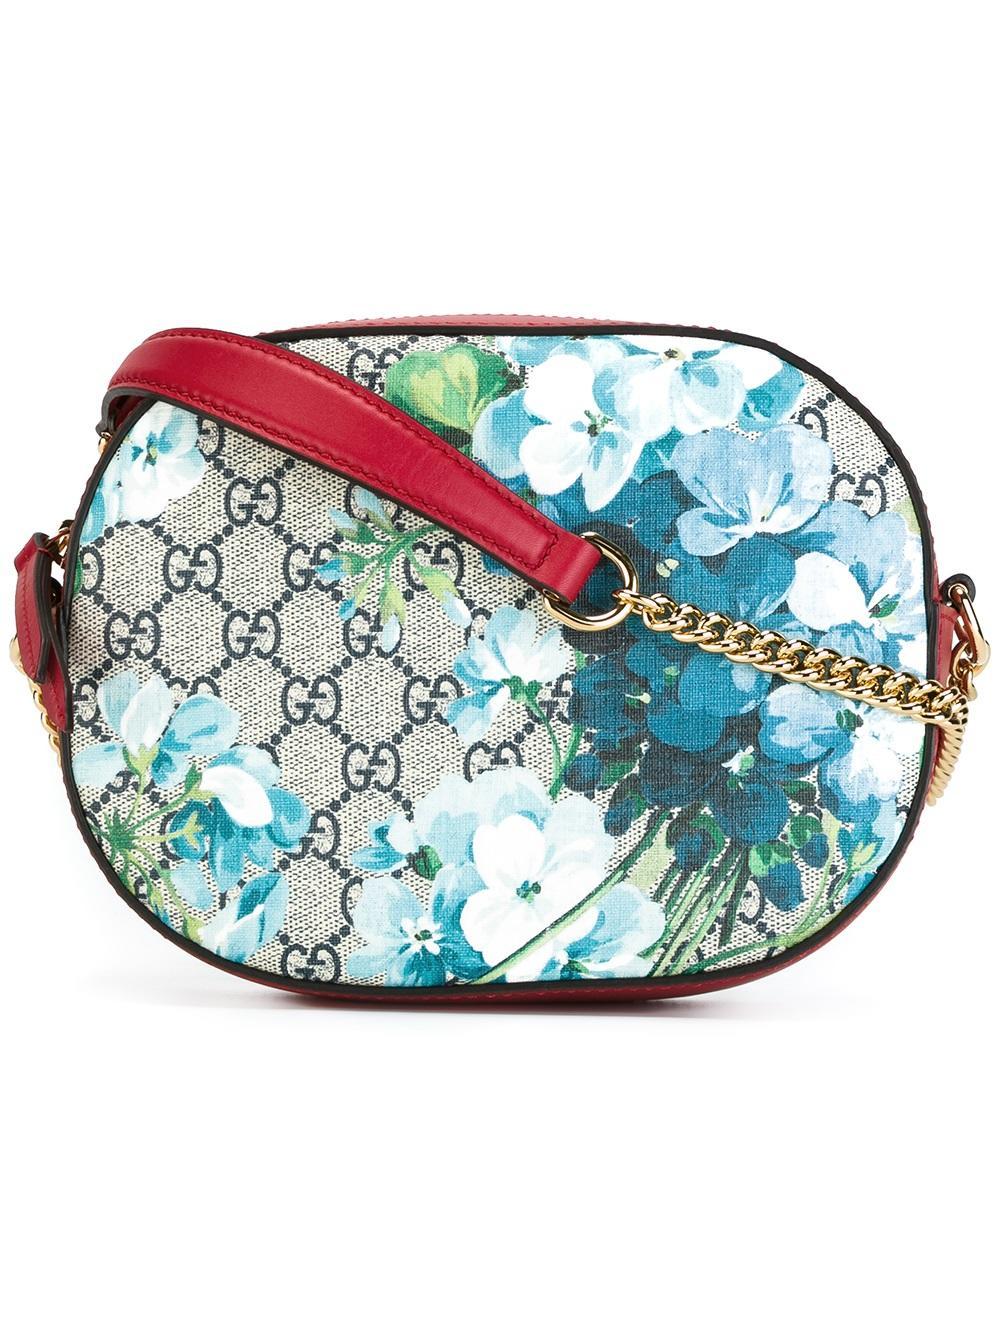 Gucci Floral Print Crossbody Bag in Red